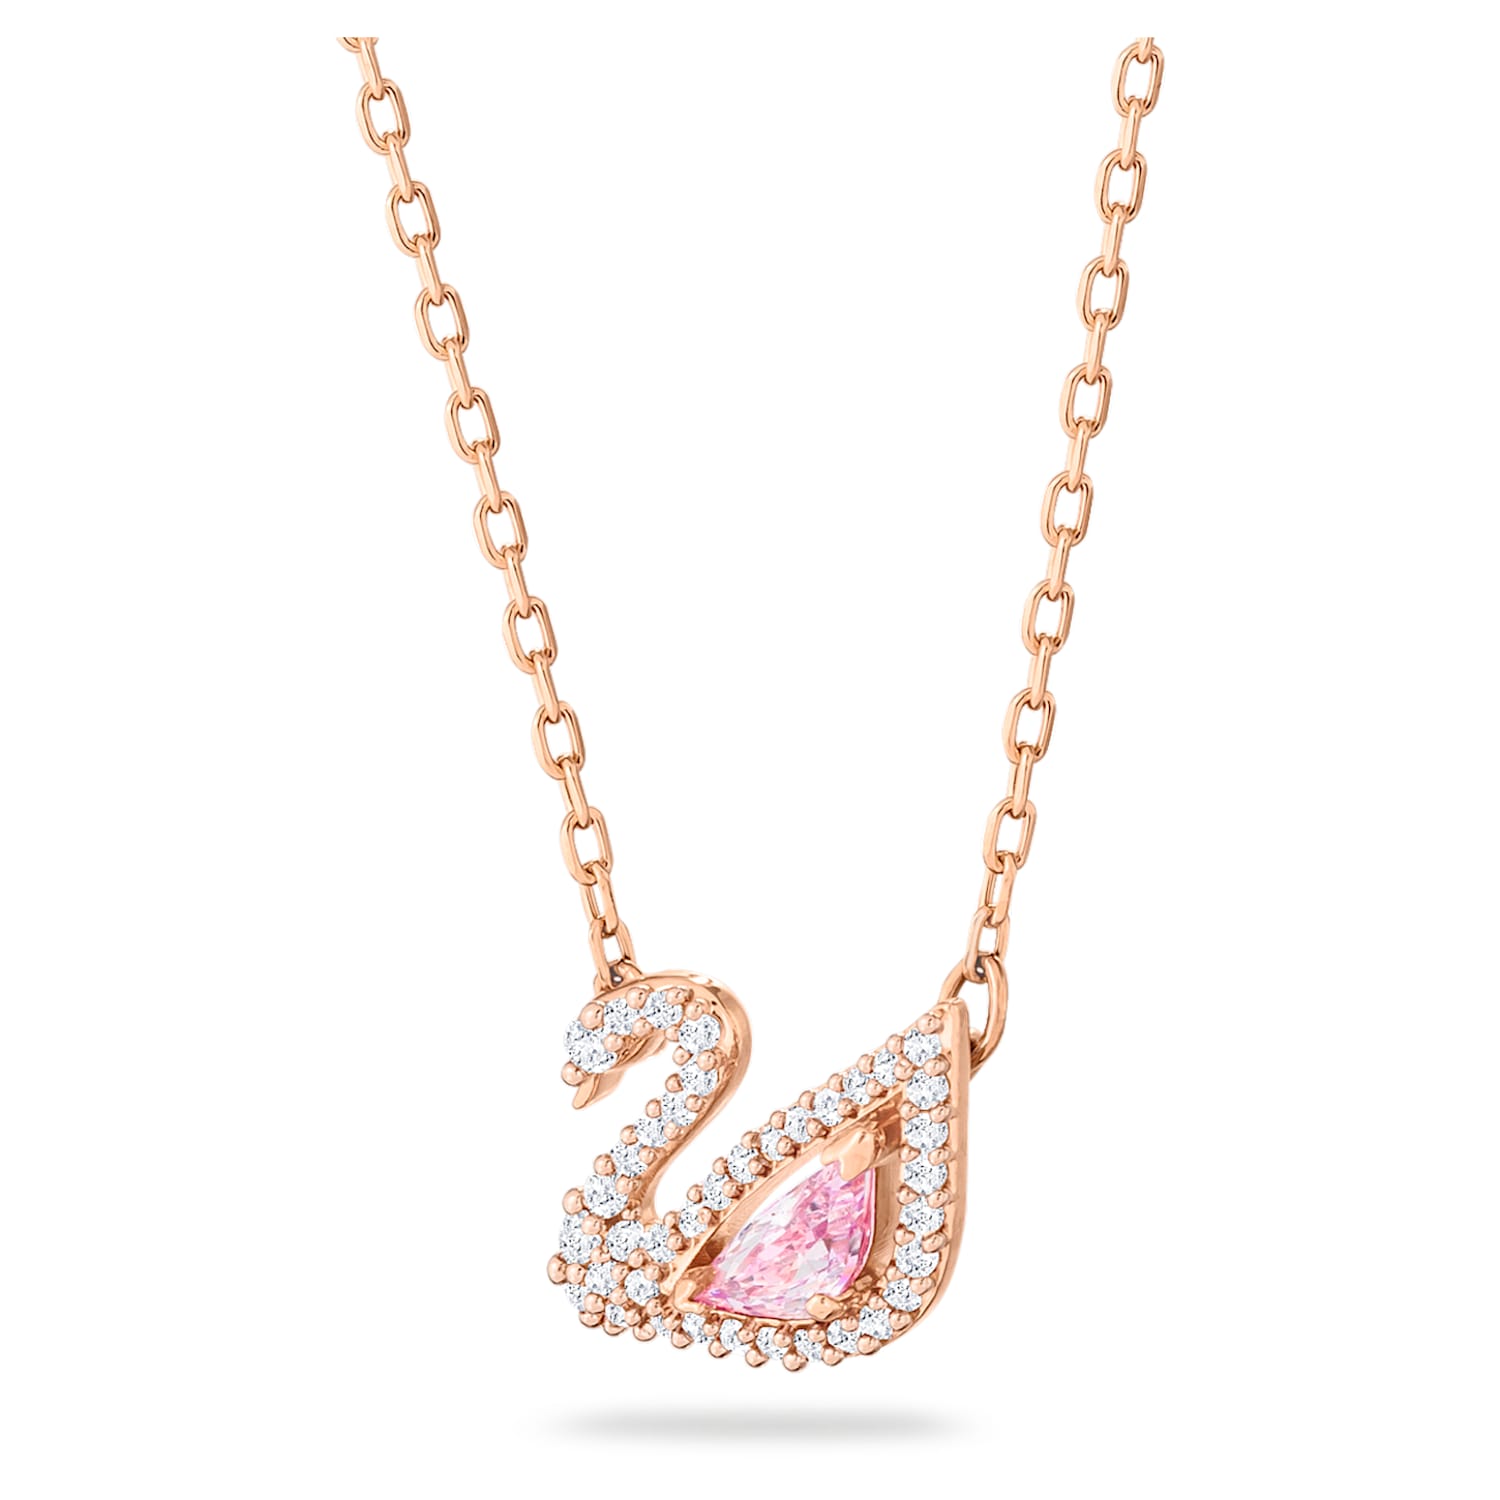 Rose Gold Plated Fashion Statement Women Crystal Pink Pendant Necklace Jewelry